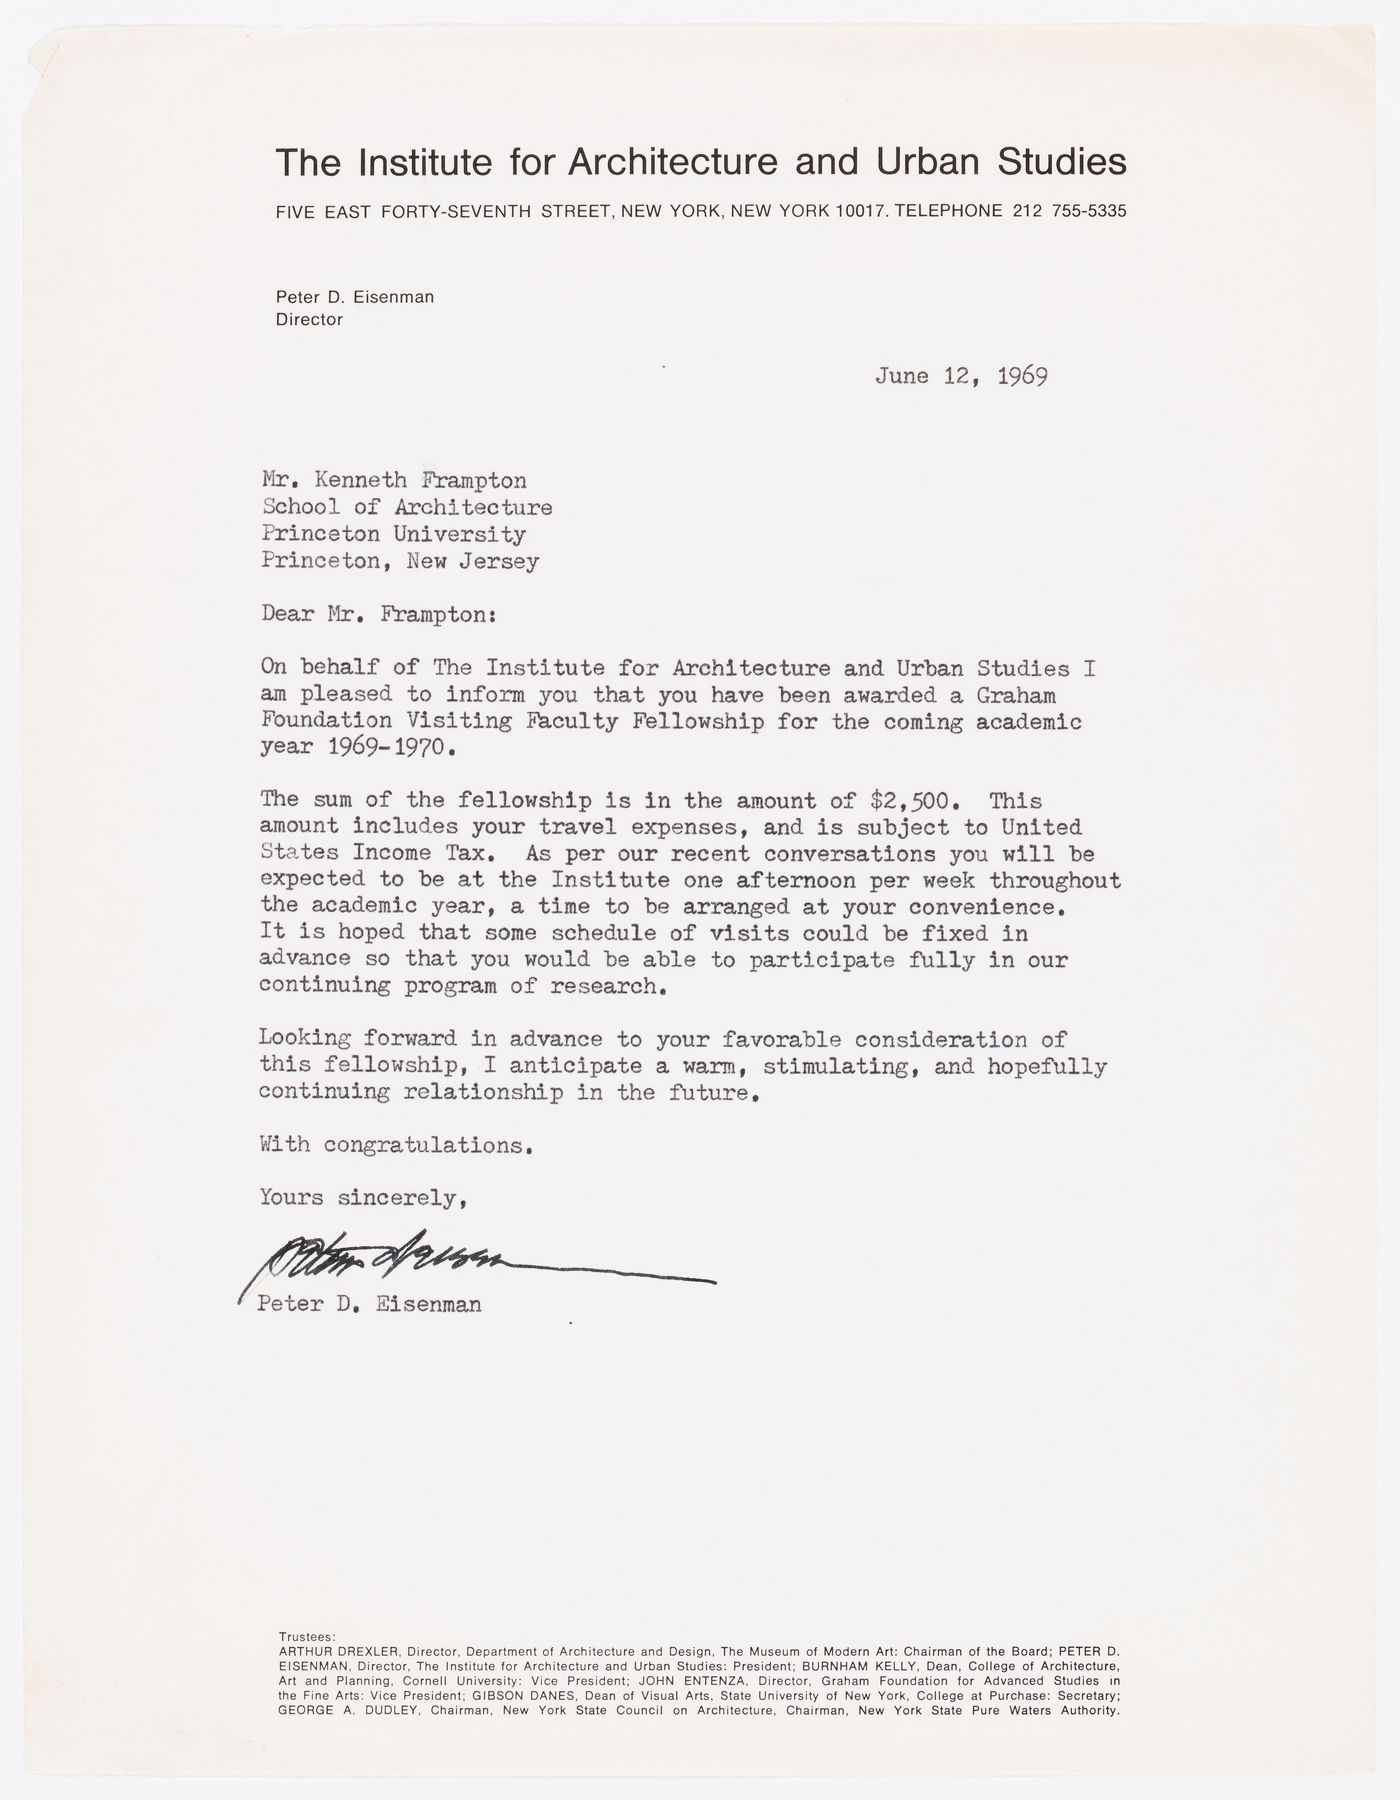 Letter from Peter D. Eisenman to Kenneth Frampton about awarded a research fellowship